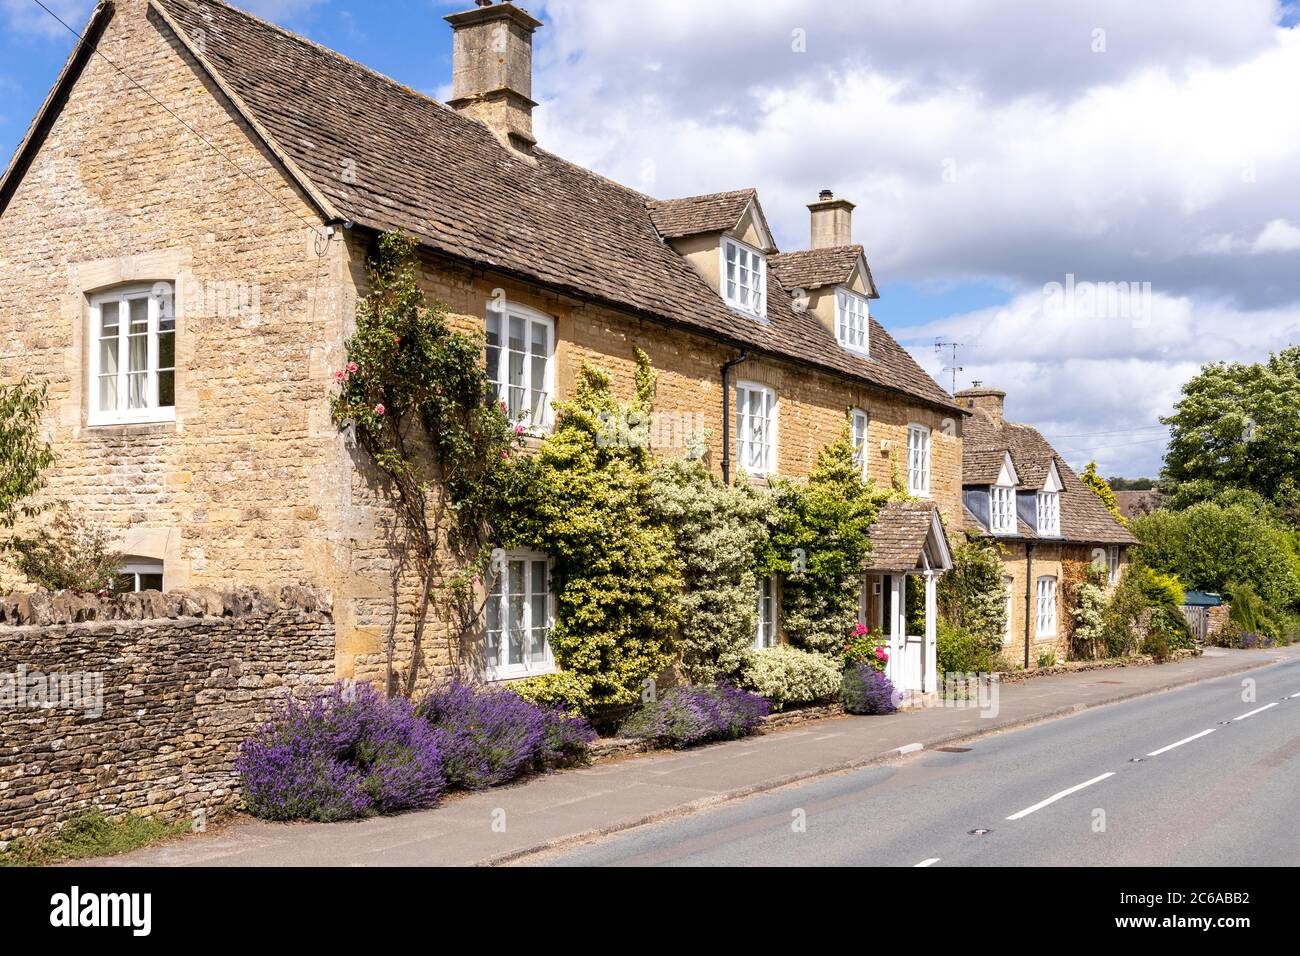 The old stone farmhouse in the Cotswold village of Lower Swell, Gloucestershire UK Stock Photo